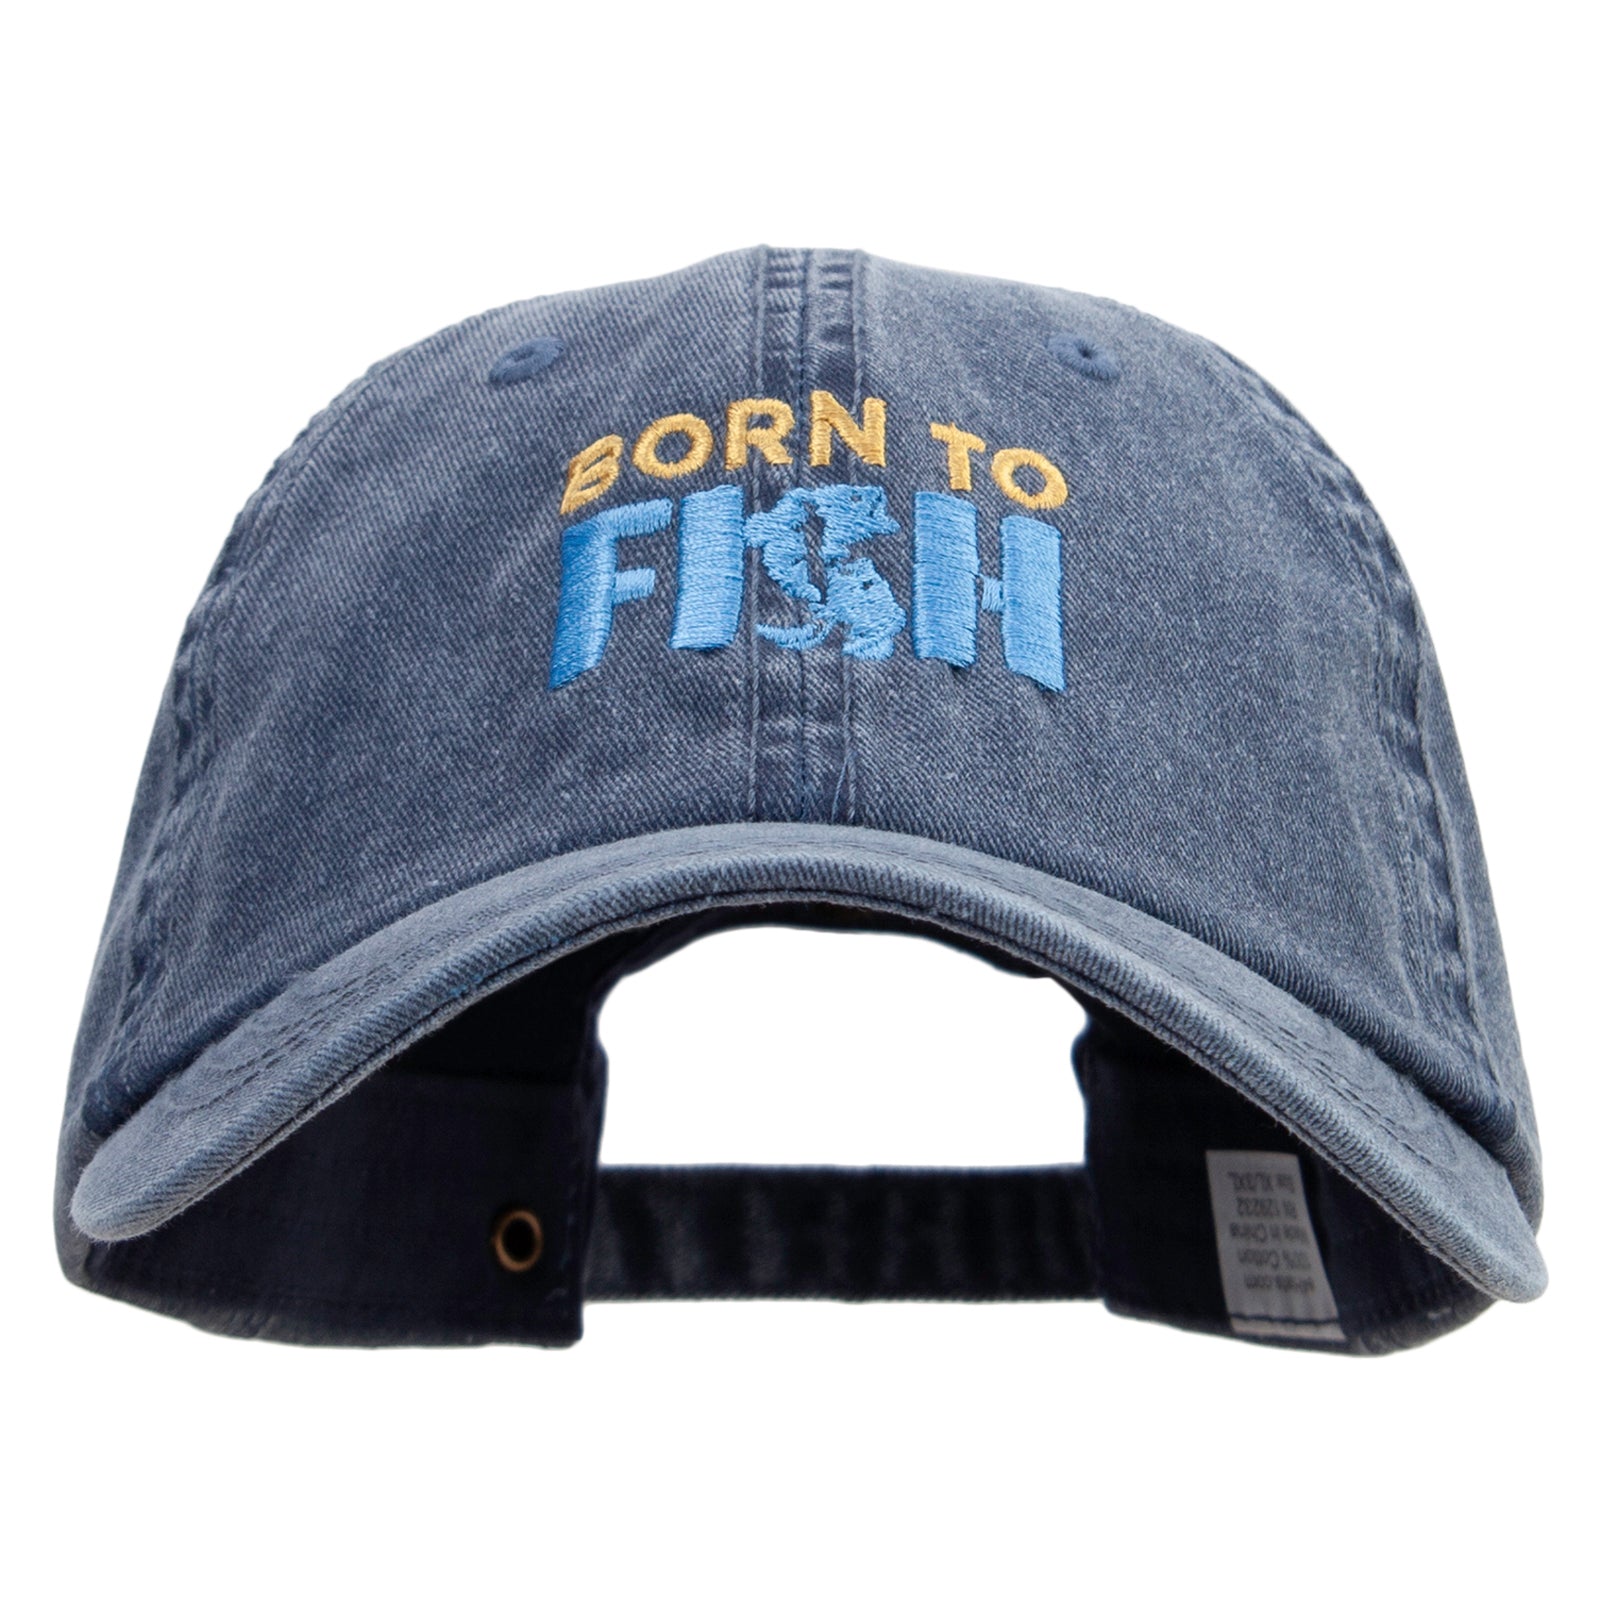 Born to Fish Embroidered Big Size Washed Pigment Dyed Cap, Navy / XL-3XL